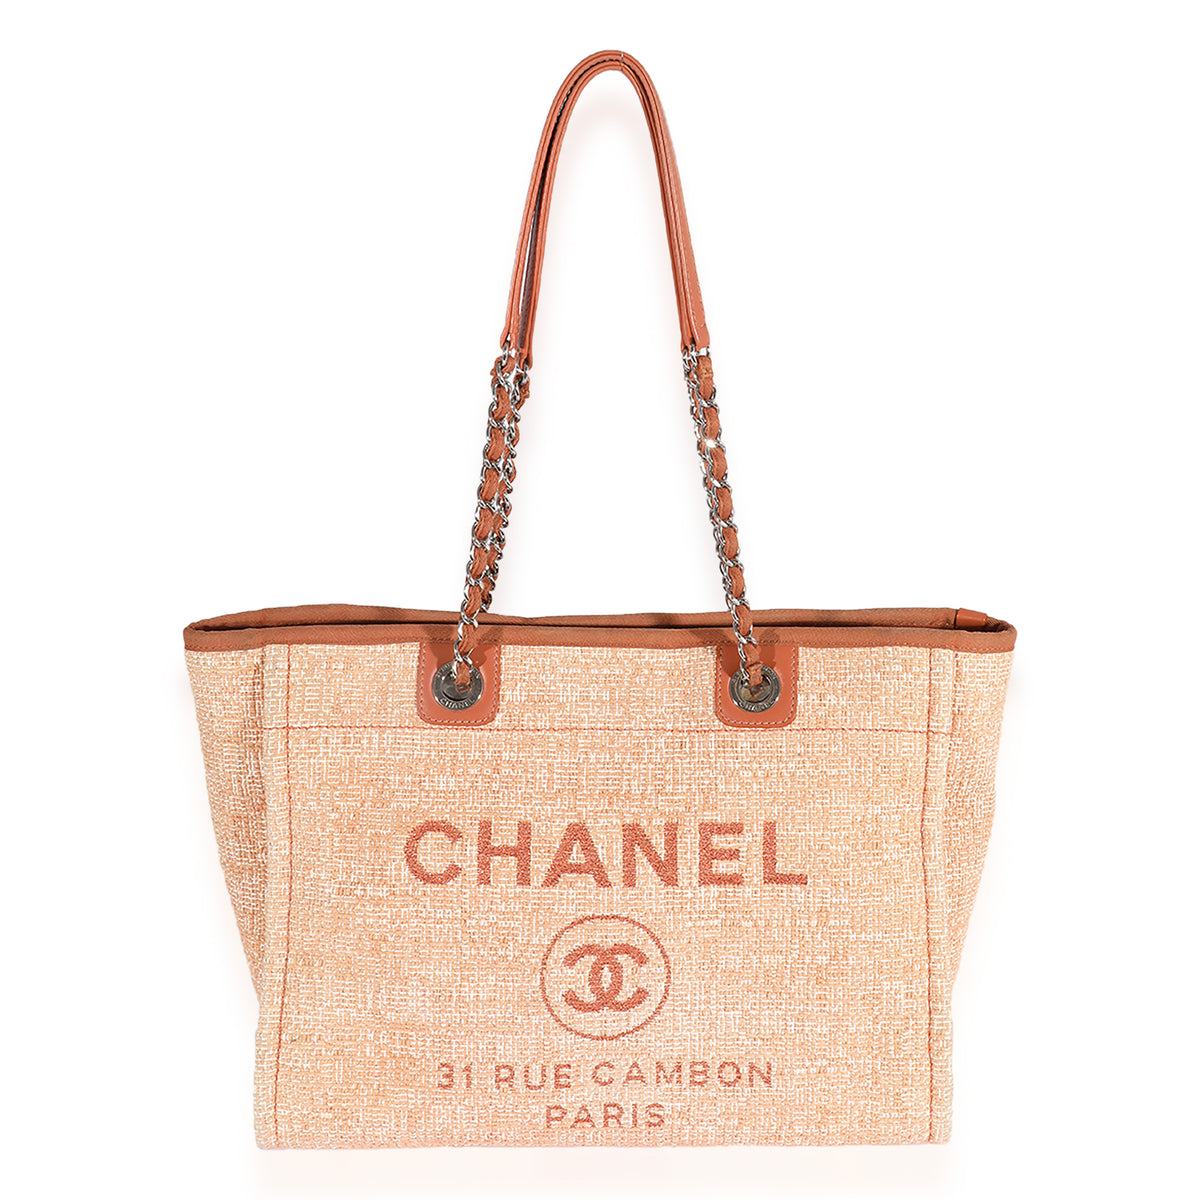 Deauville tweed tote